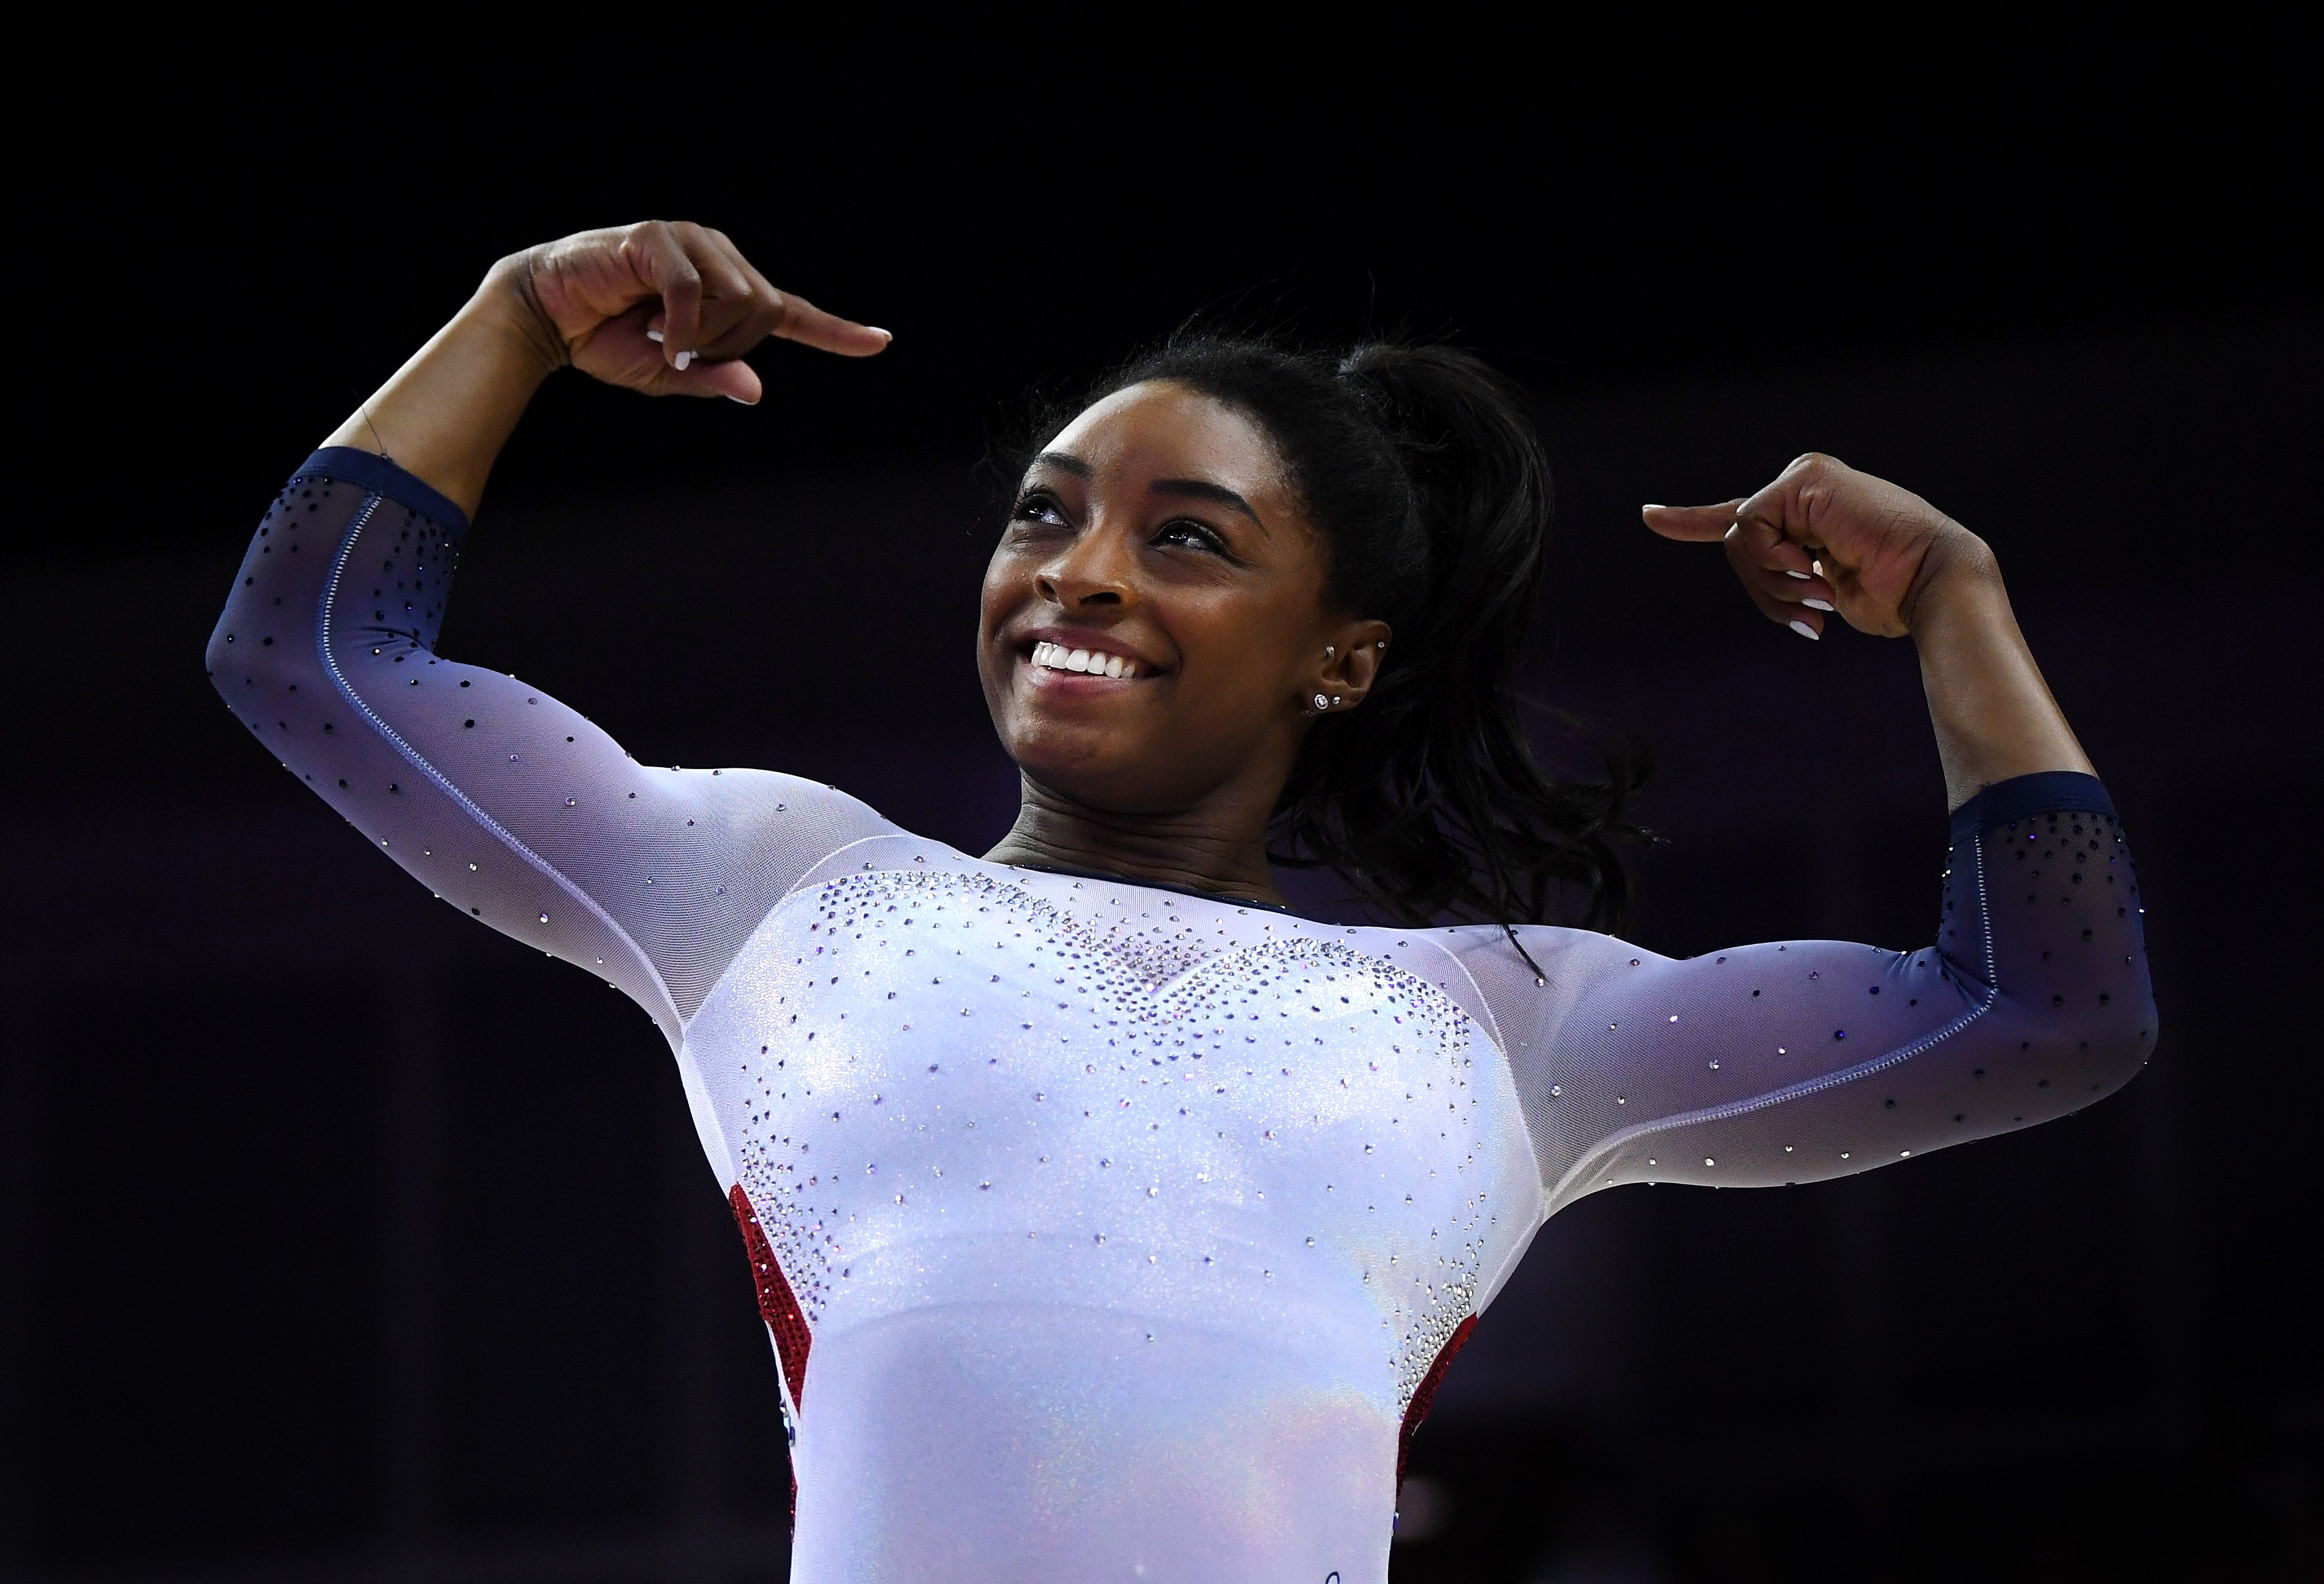 Simone Biles of the USA poses during Superstars of Gymnastics at the O2 Arena on March 23, 2019, in London, England. | Source: Getty Images